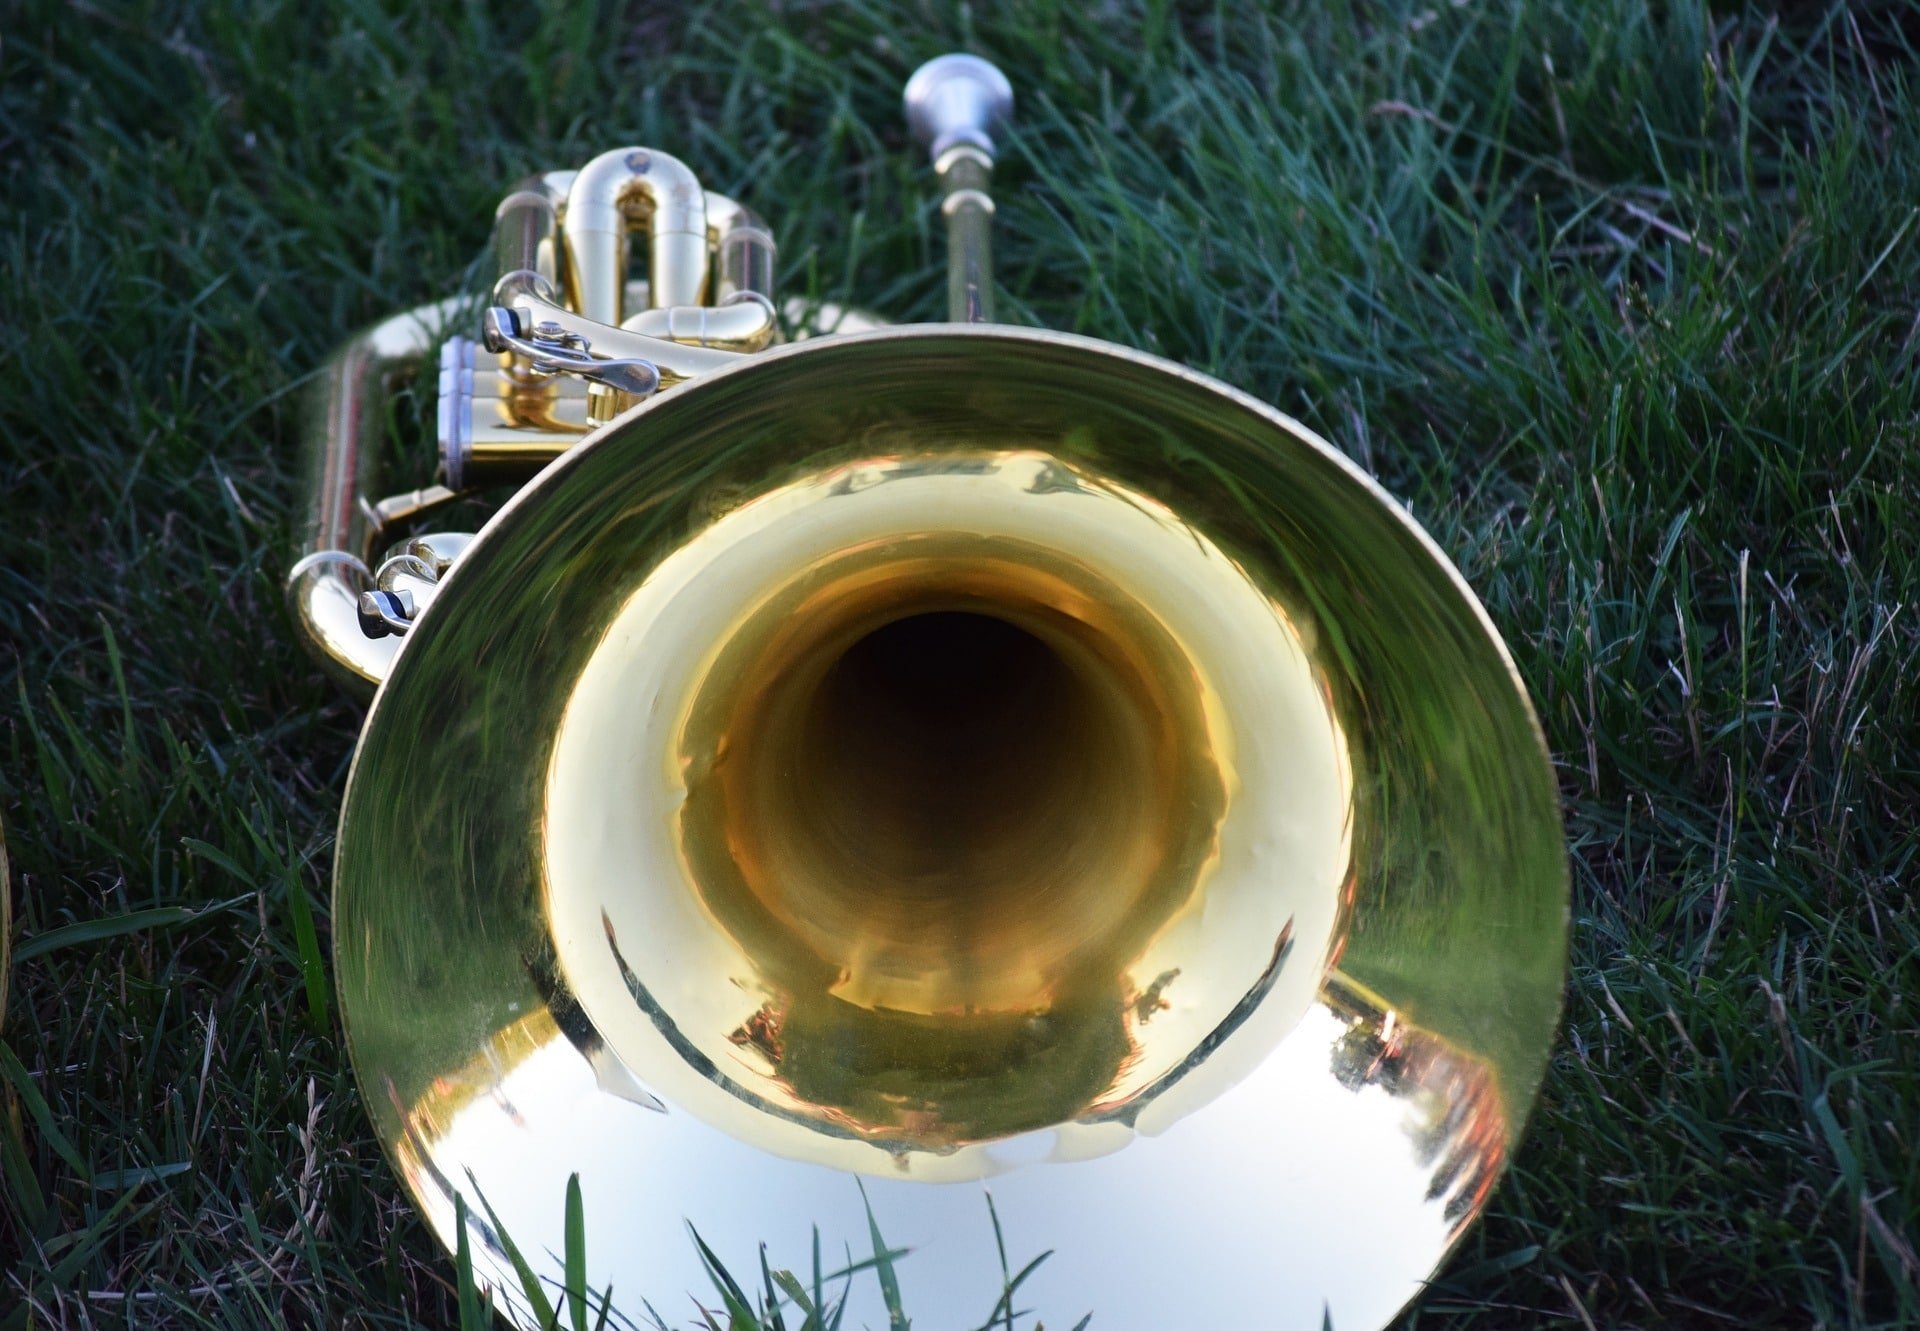 Bell - Parts of a Trumpet